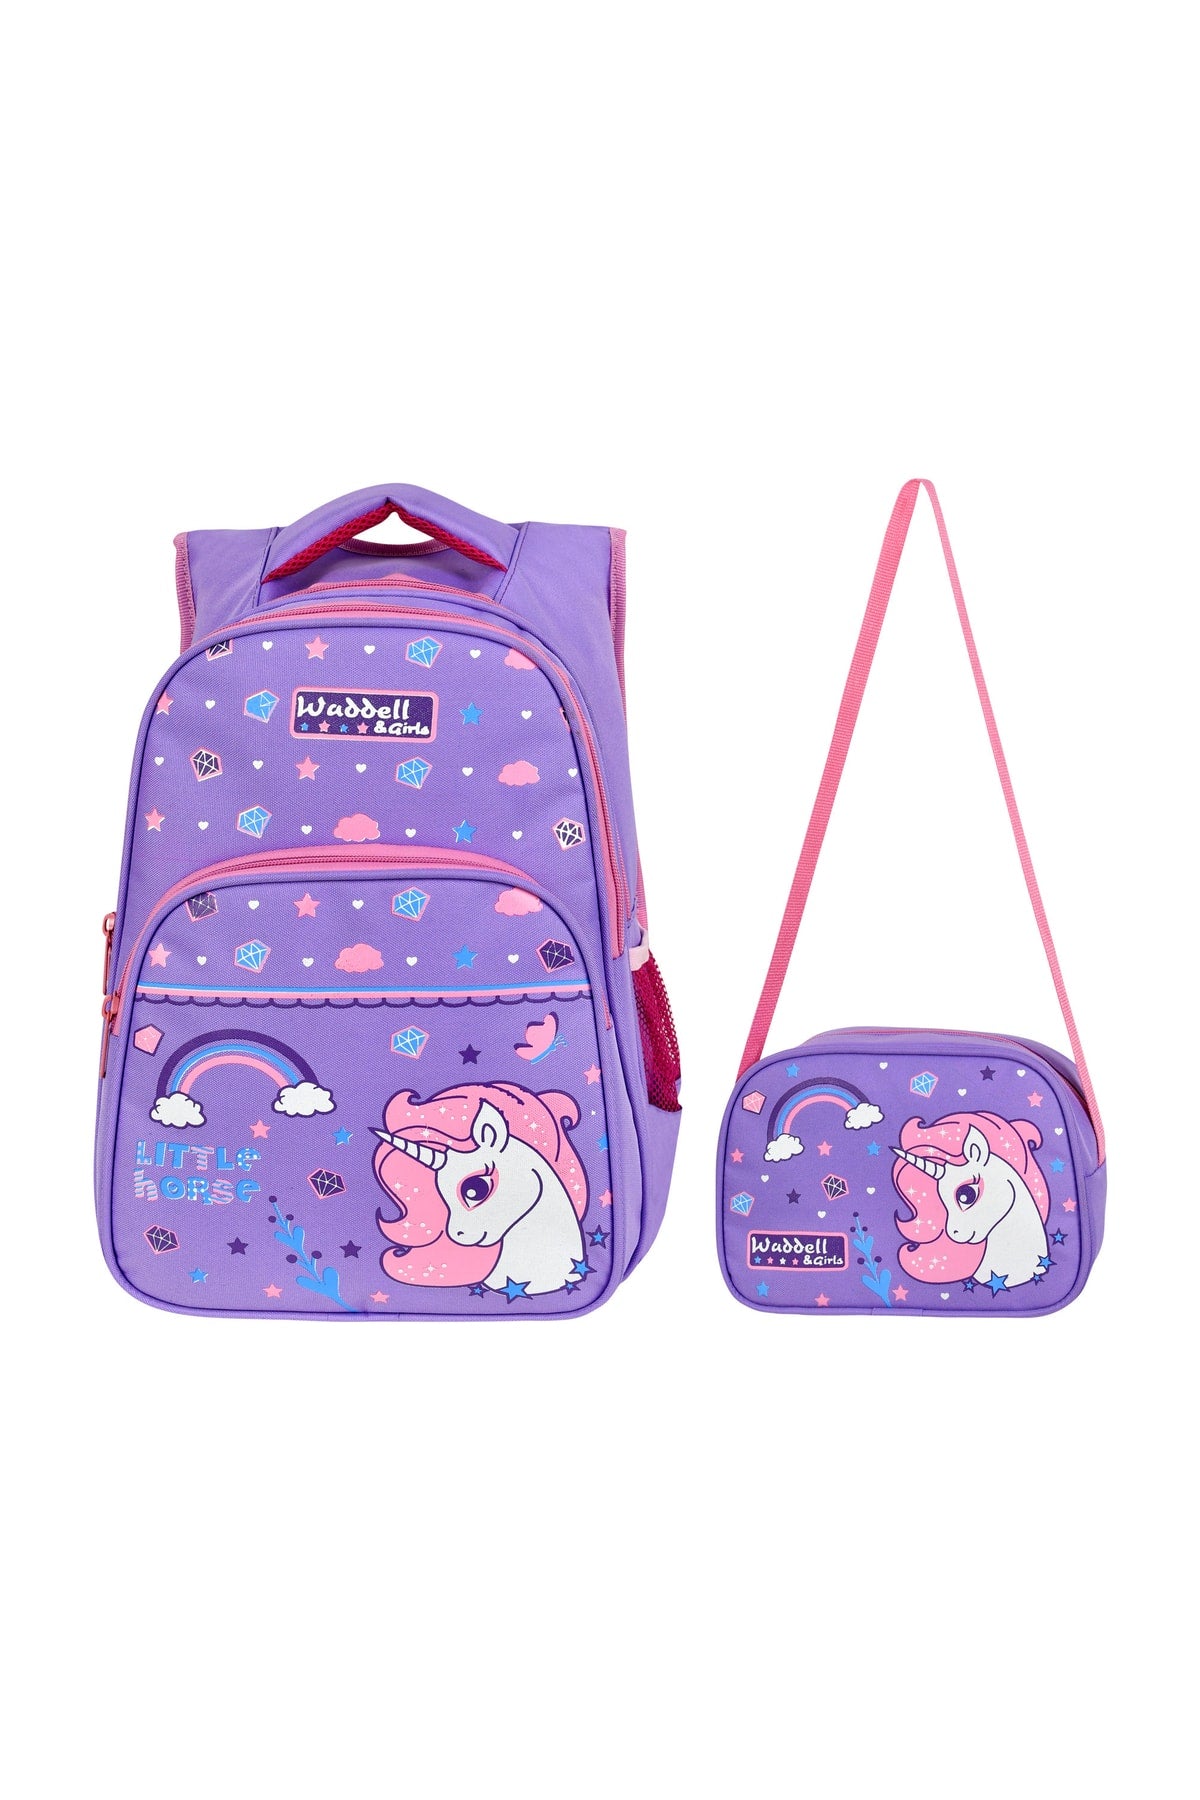 Licensed Lilac Little Horse Patterned Girl Primary School Backpack And Lunch Box